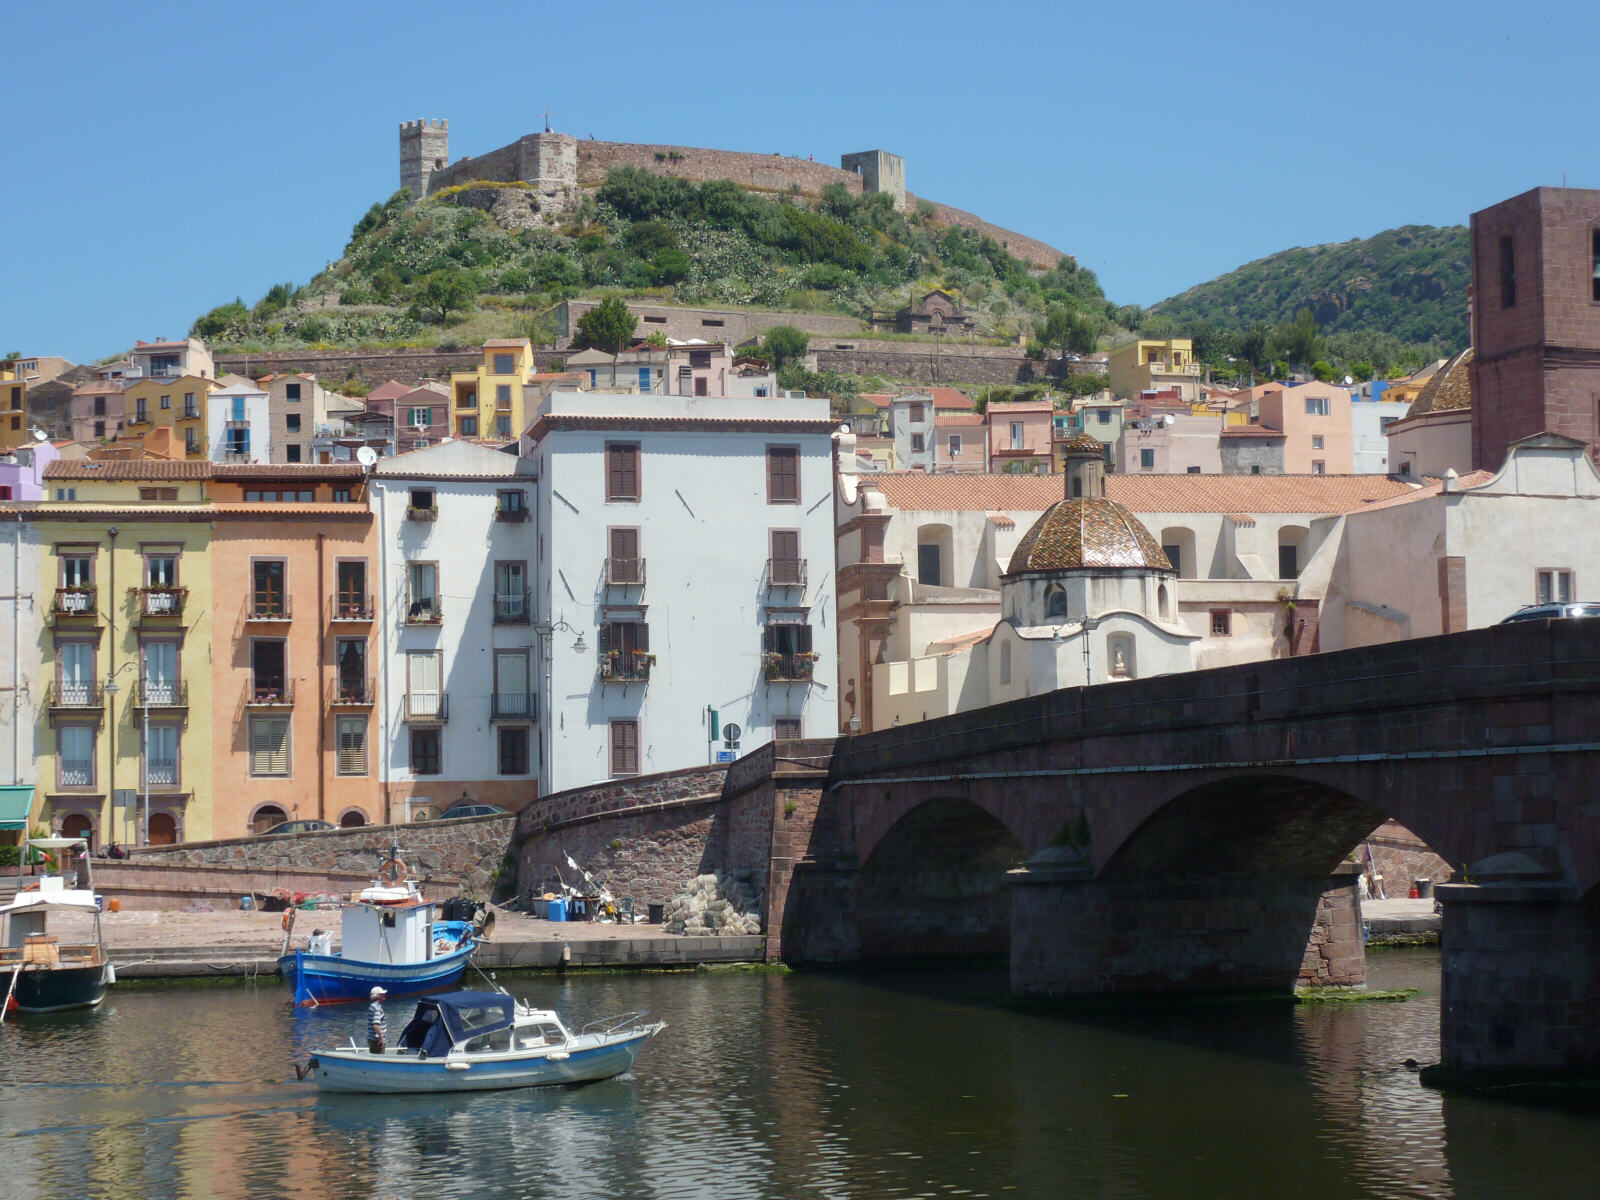 The old town of Bosa in Sardinia